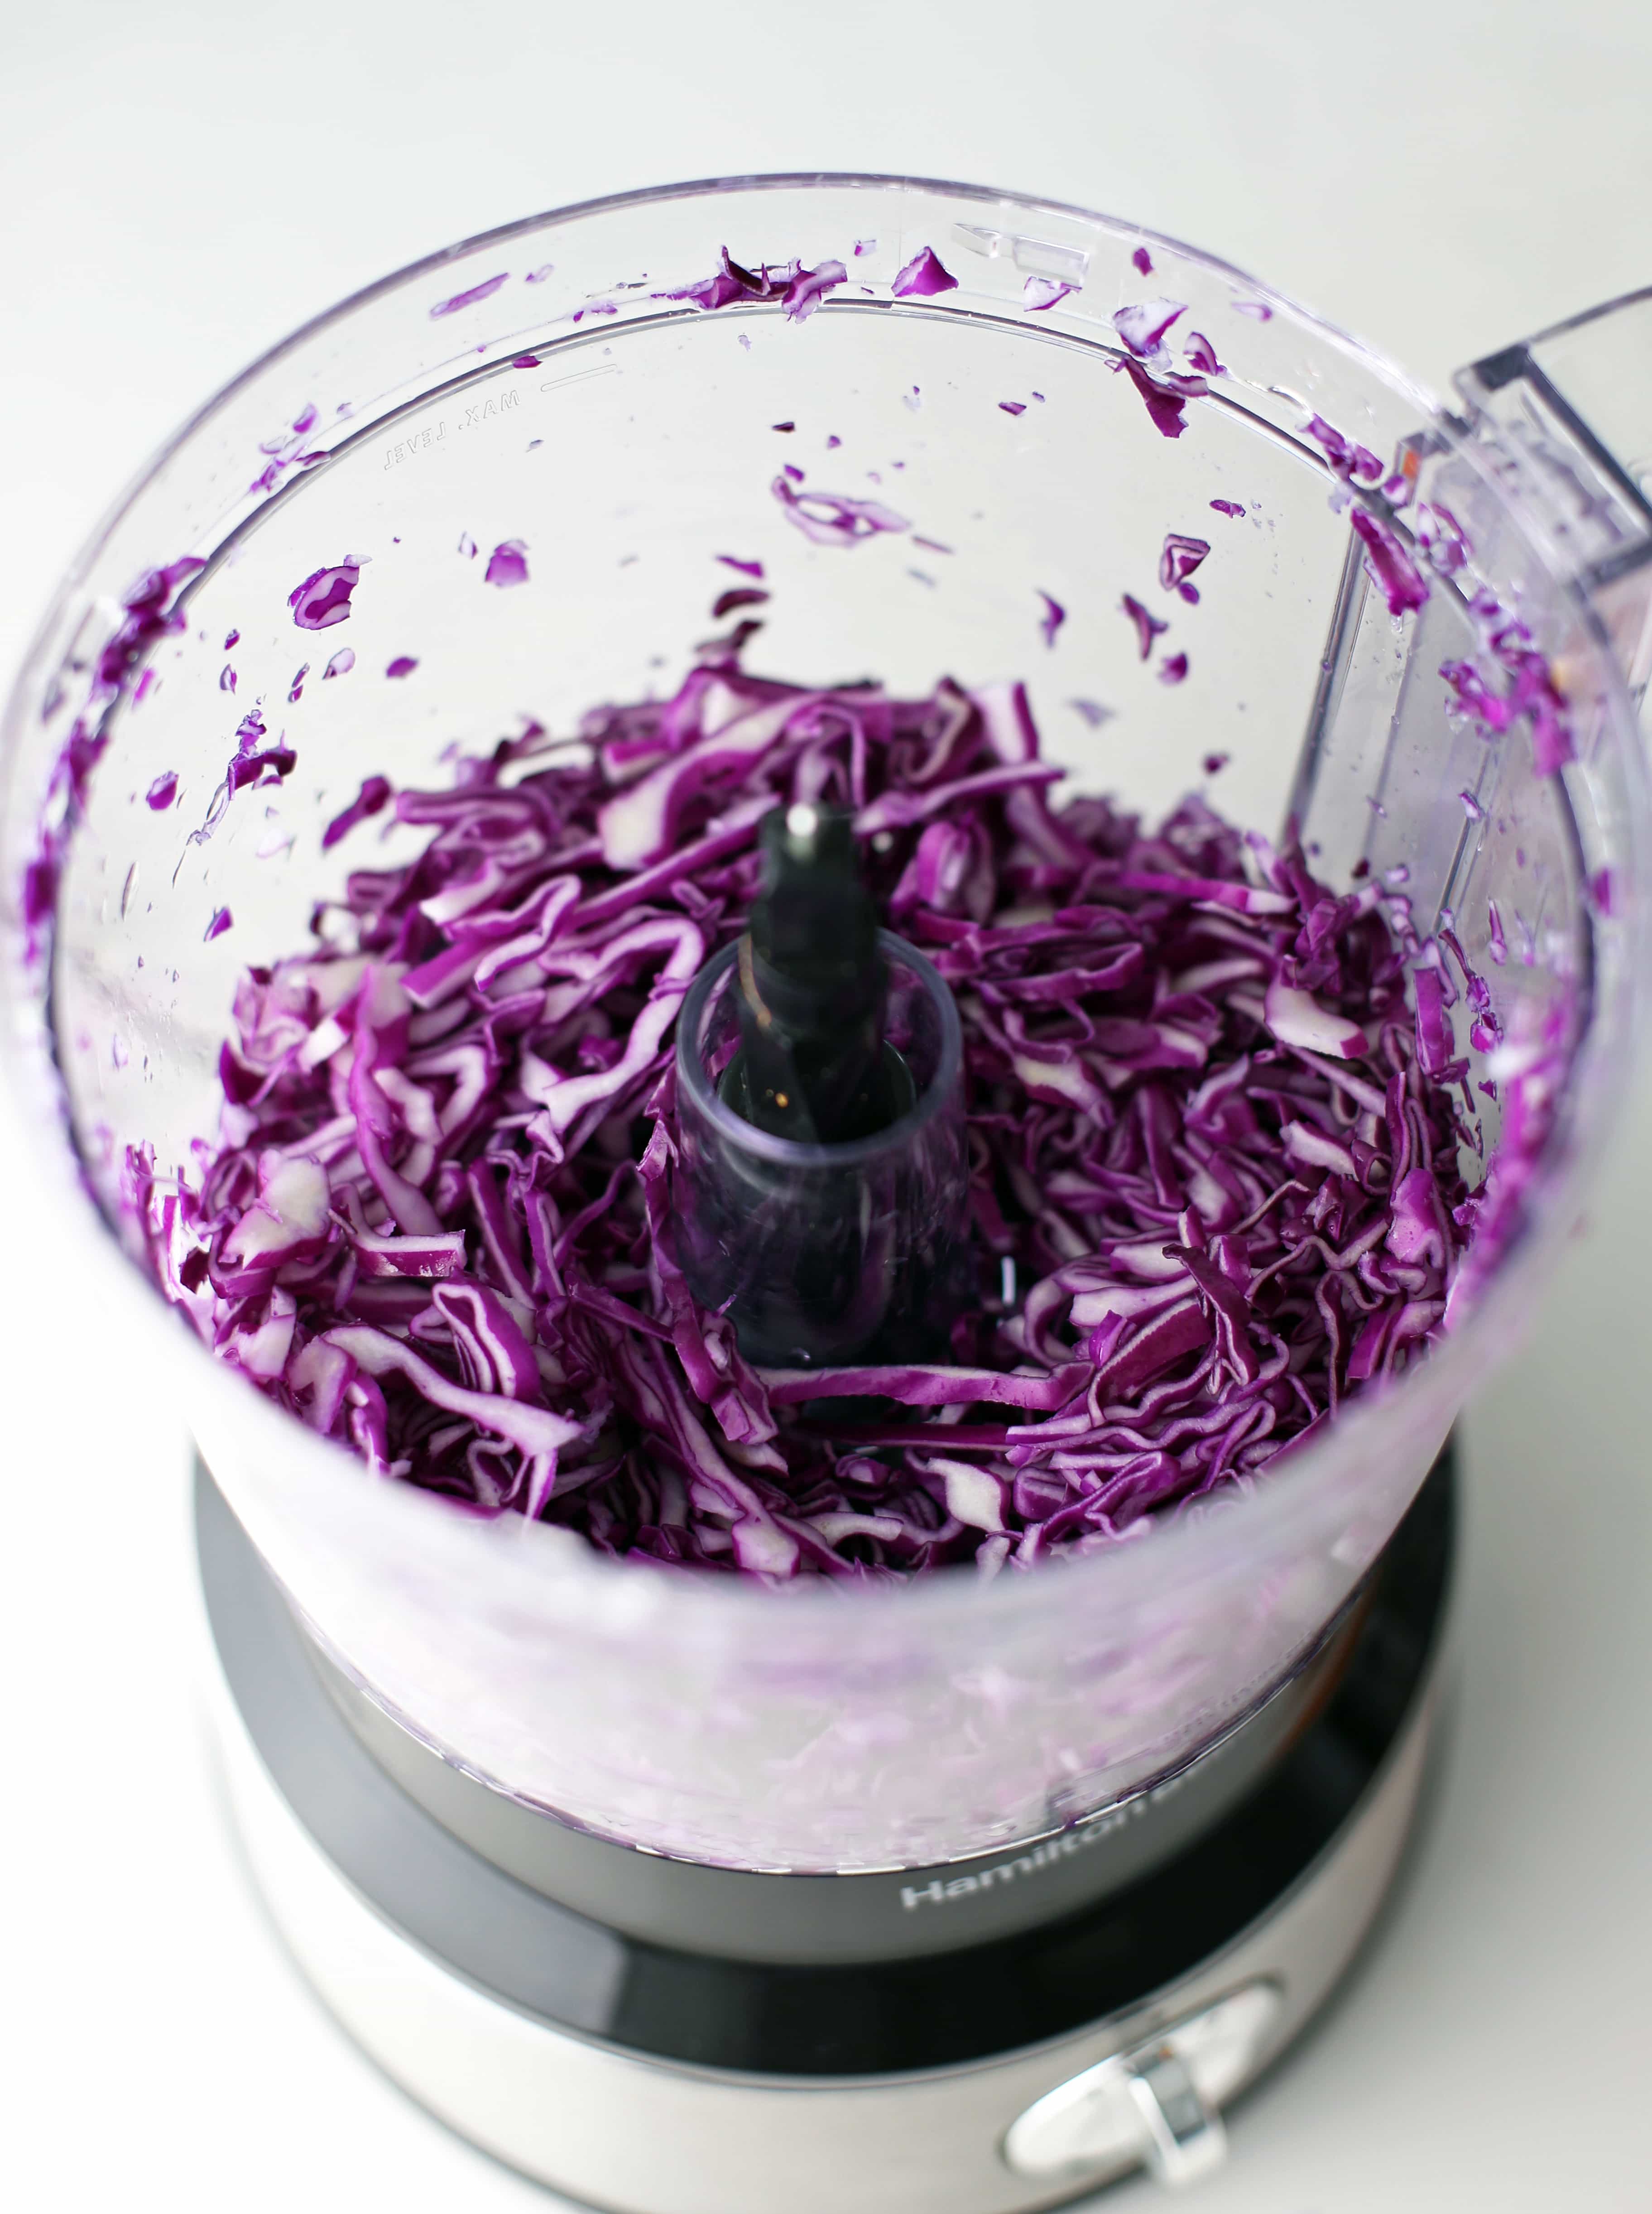 Shredded red cabbage in a food processor.